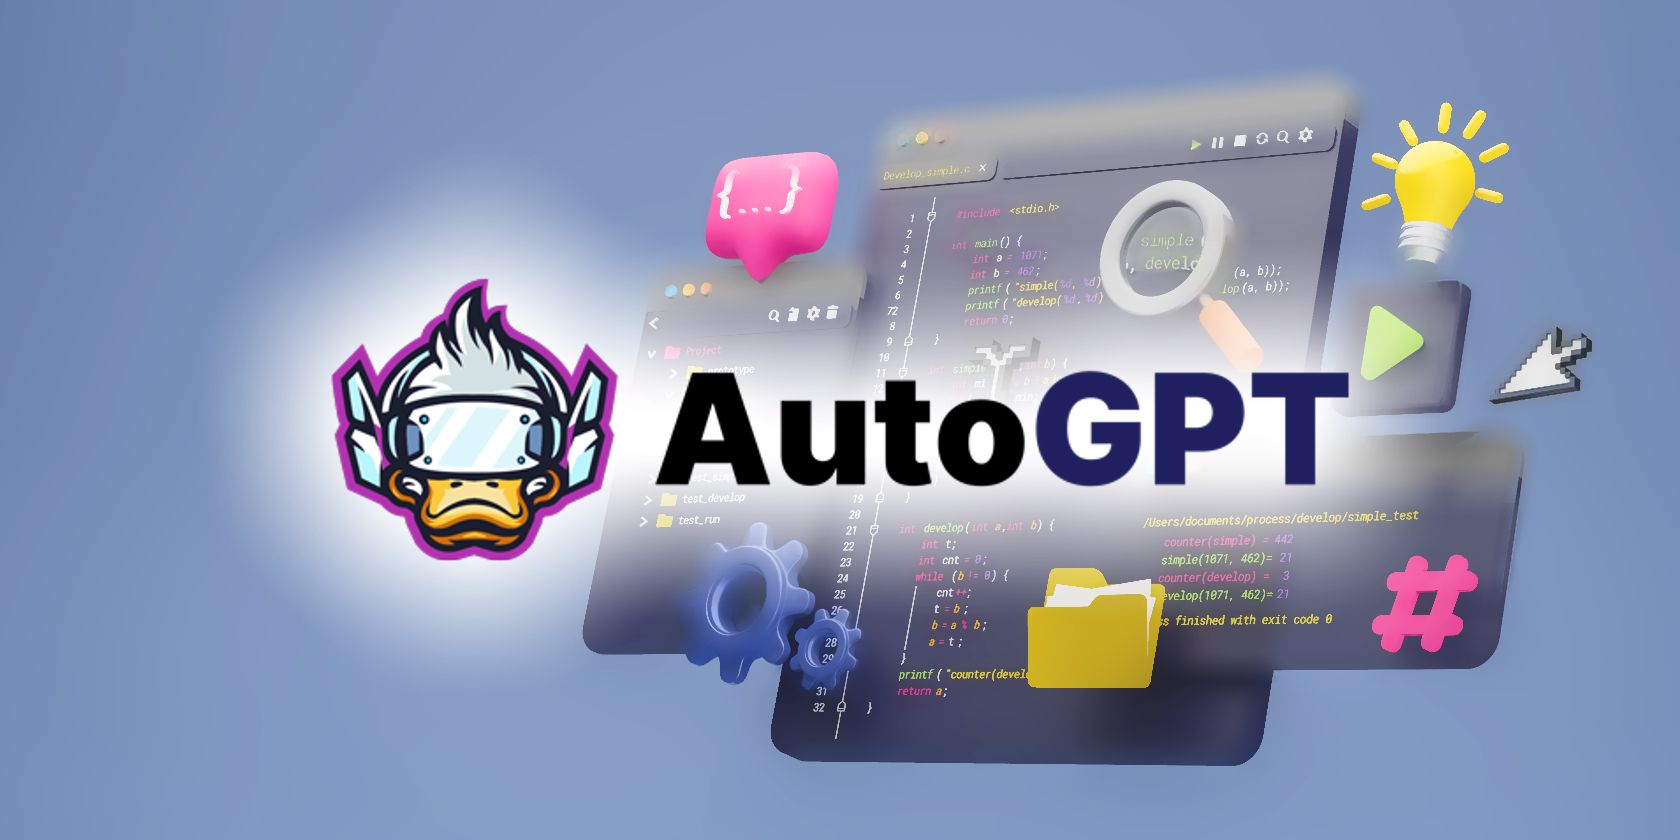 autogpt logo with script building apps in background feature